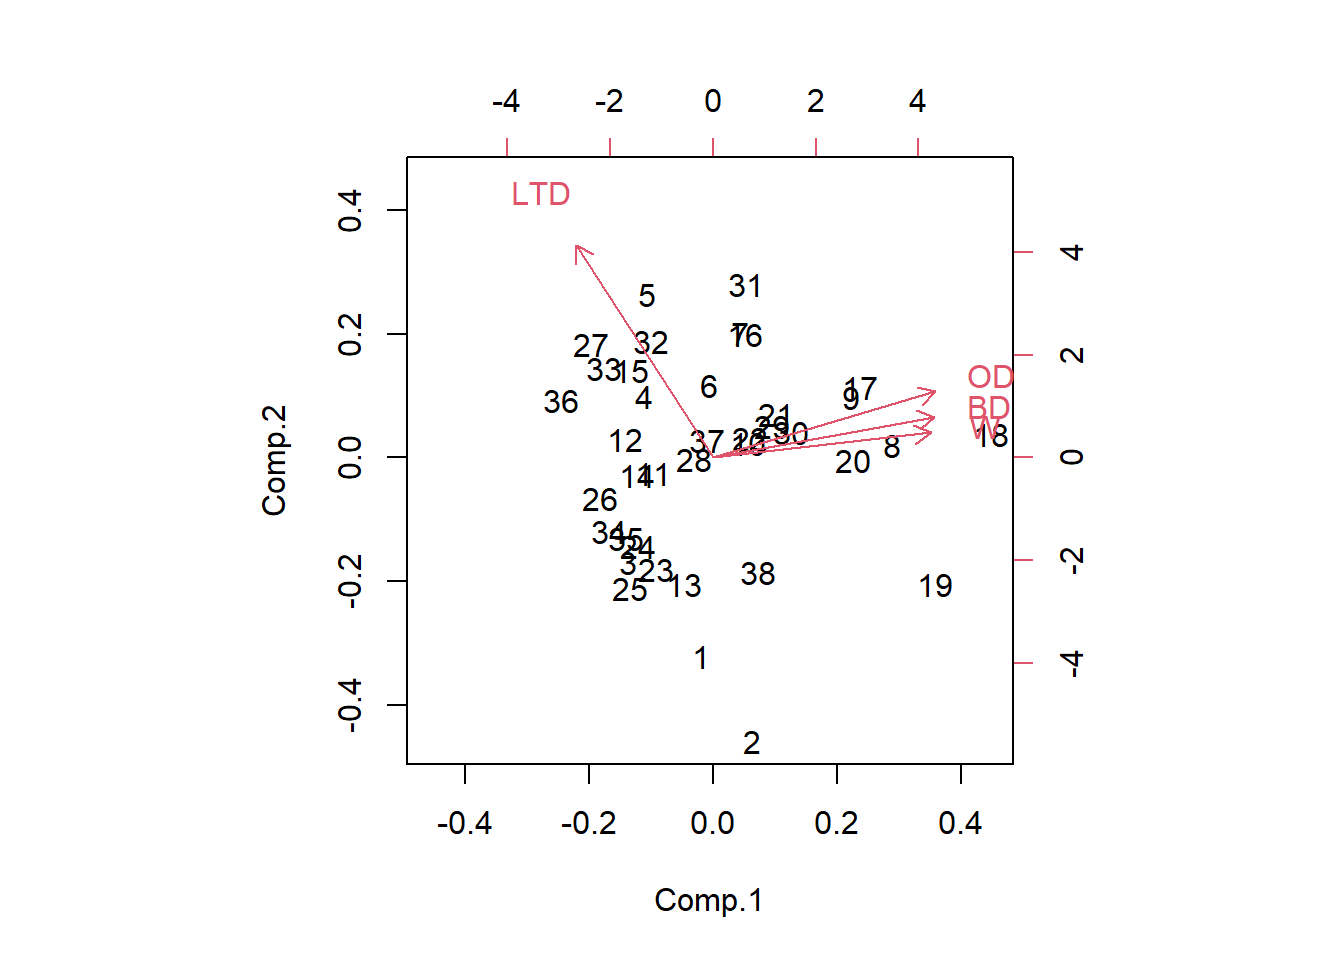 Bi-plot showing the first two principal components using the Kelp data set (Graham, 2003), along with the loadings of the original variables.